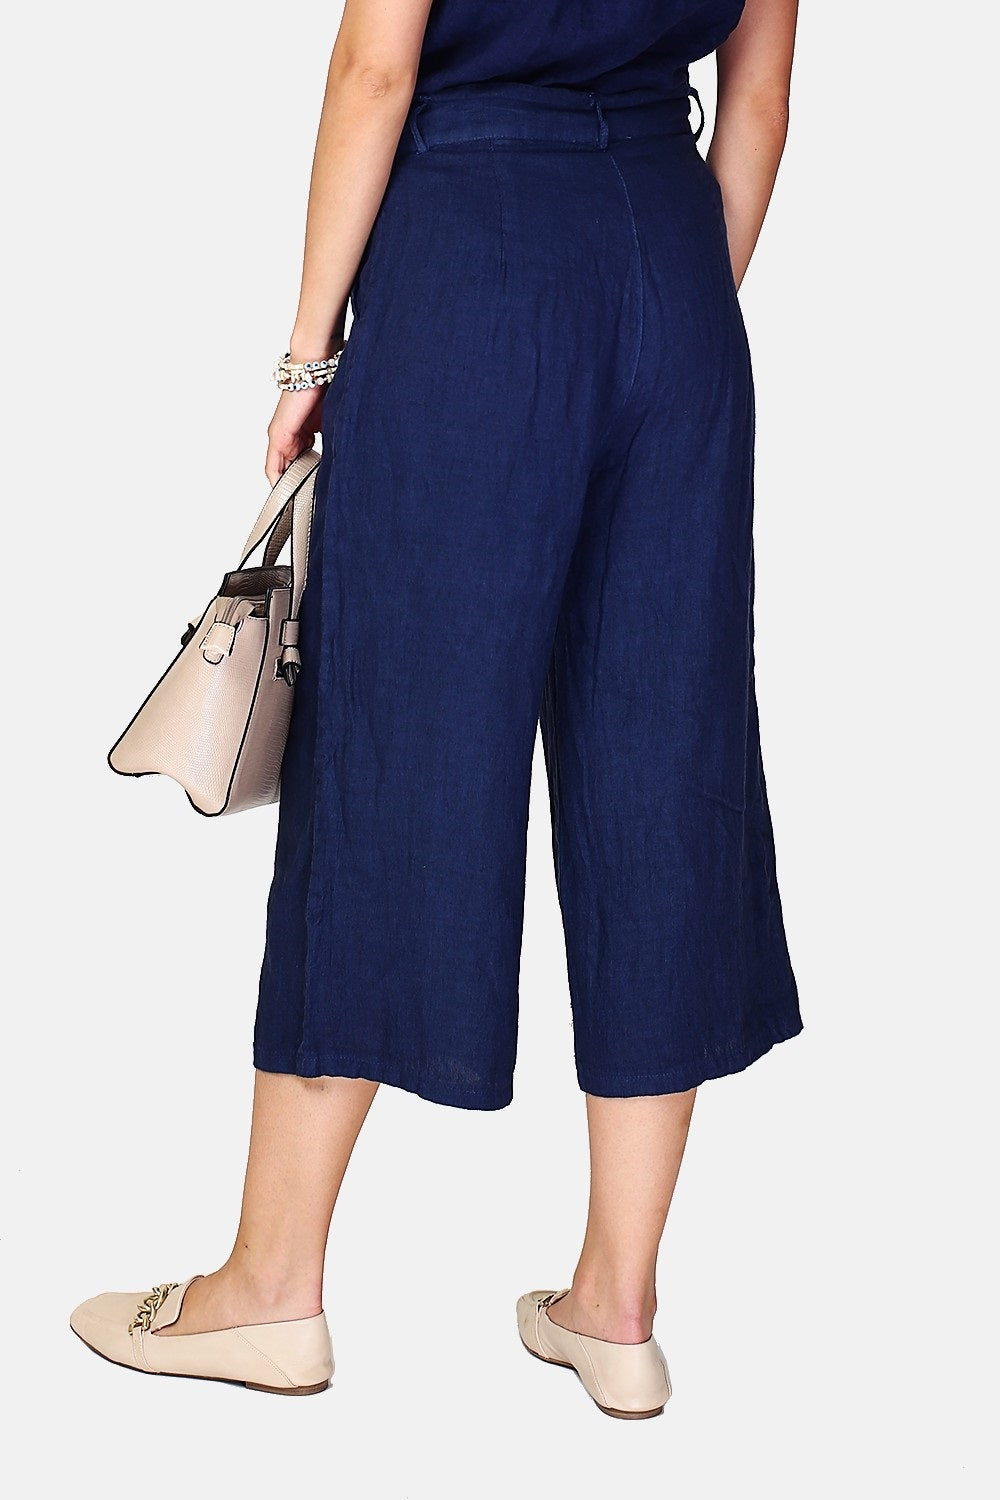 Wide, high-waisted cropped trousers, front zip fastening, side pockets